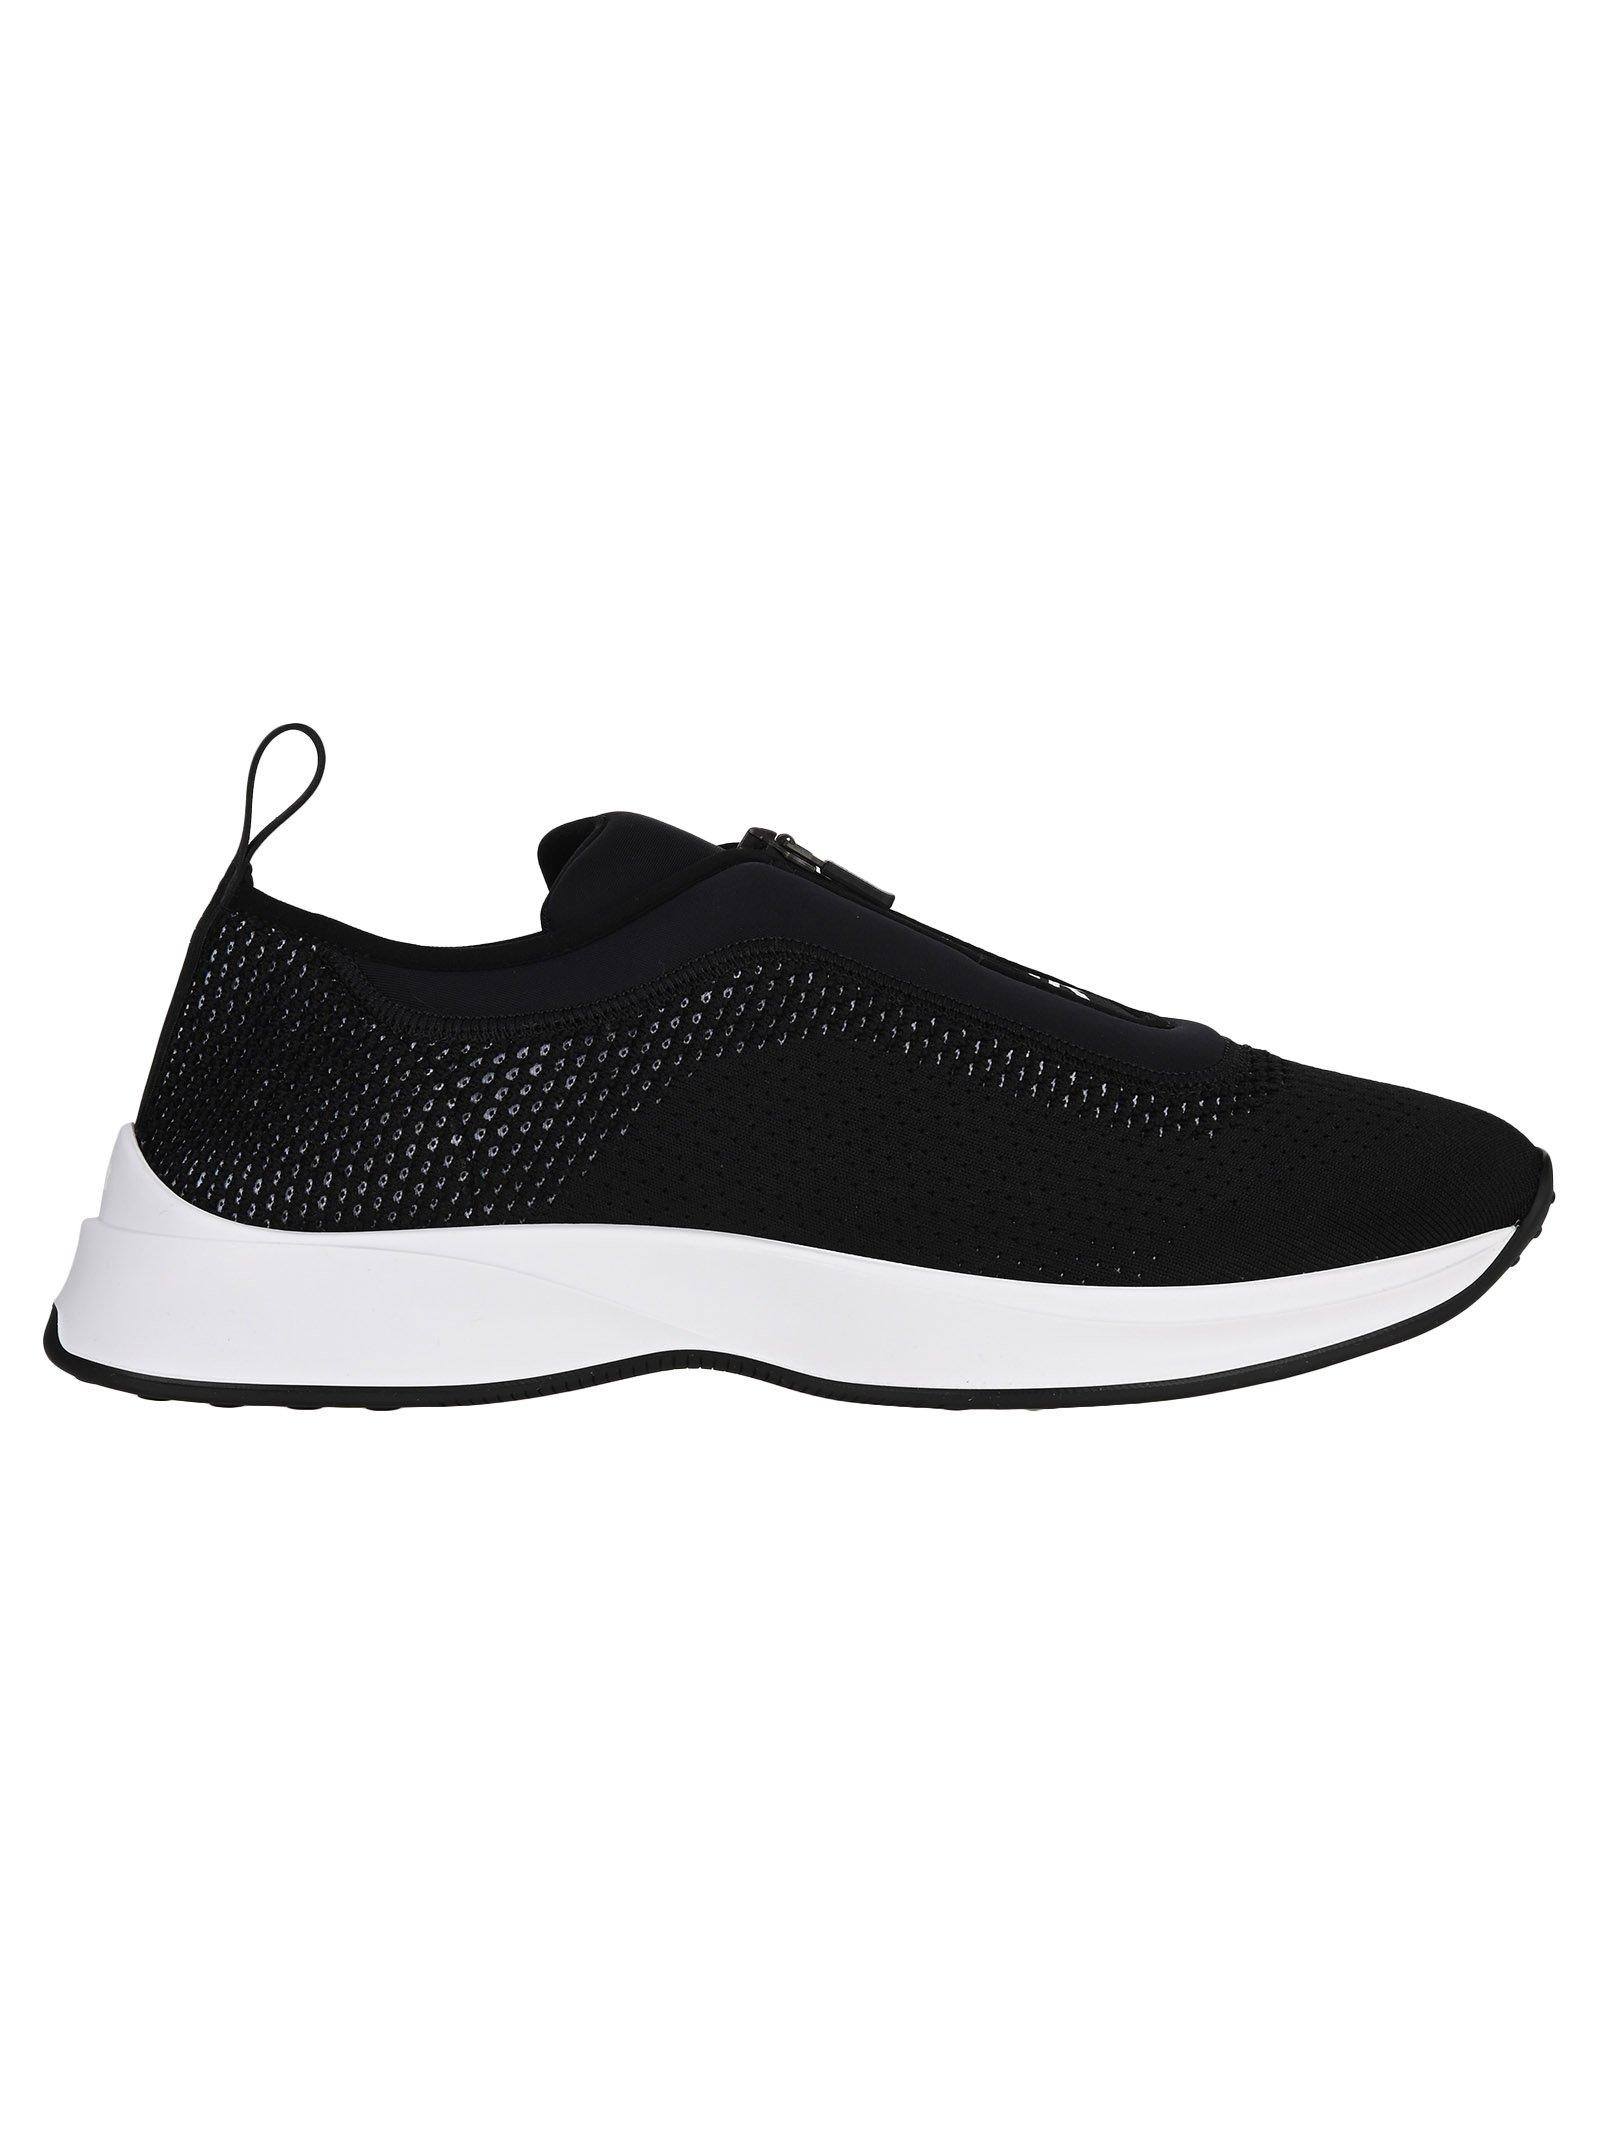 Dior Rubber B25 Low Top Sneakers in Black for Men | Lyst